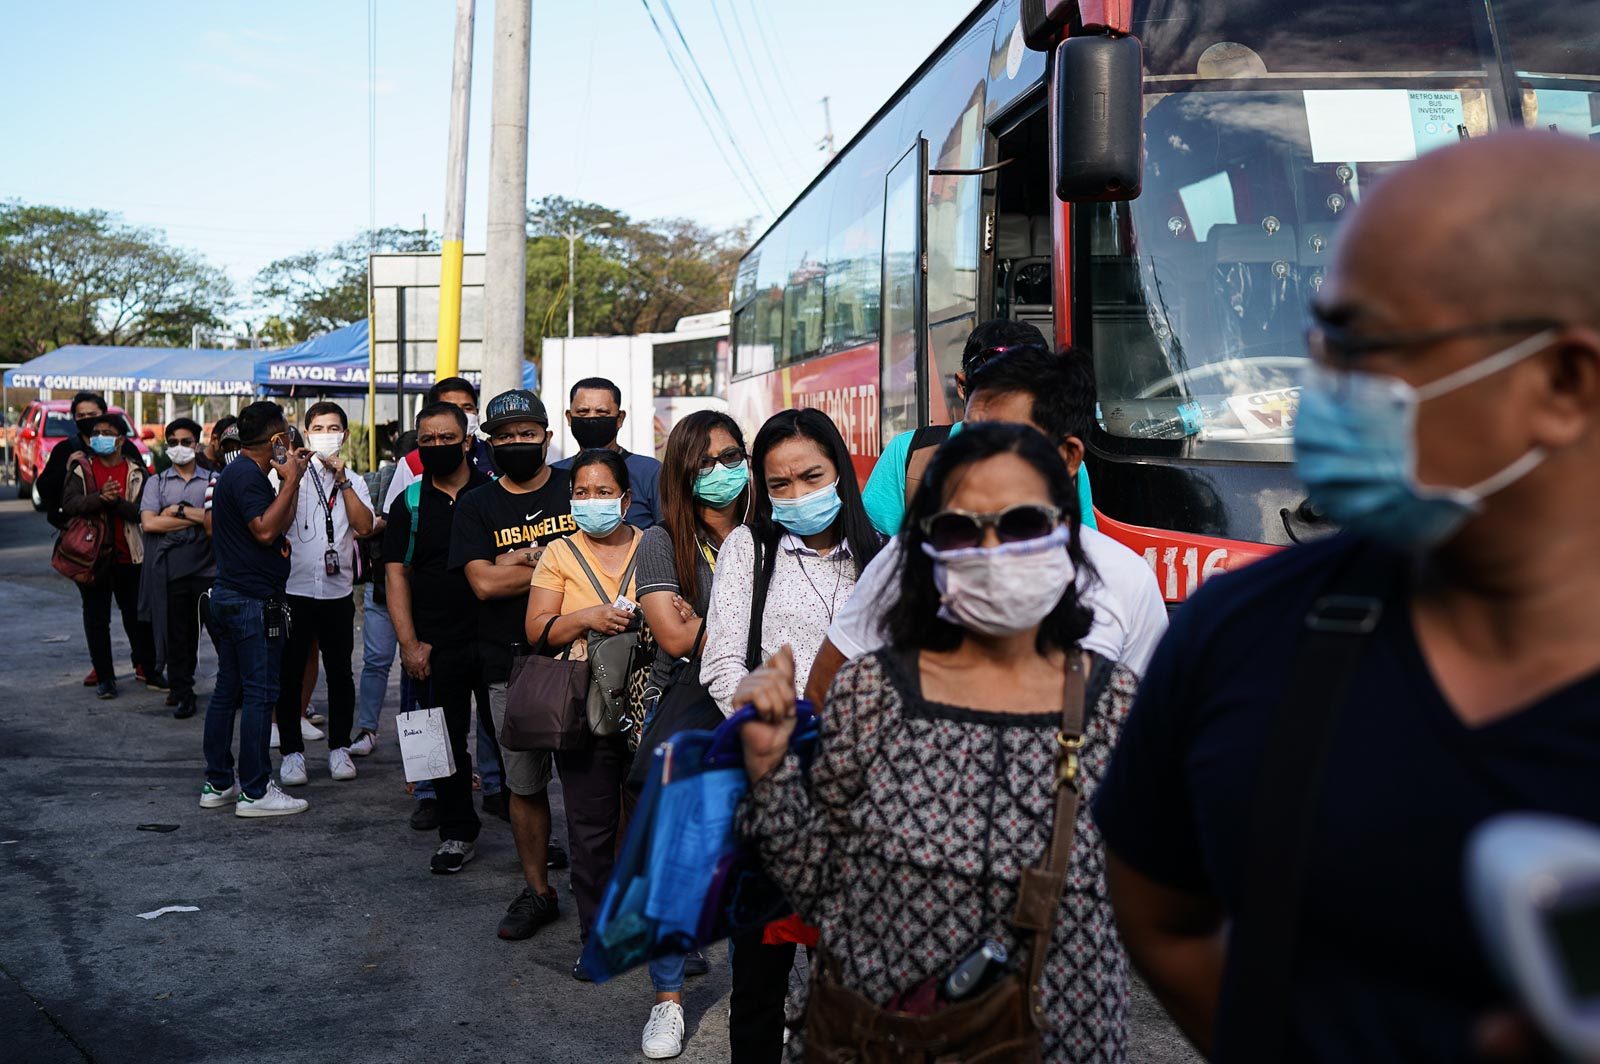 Senate approves bill giving Duterte special powers to deal with coronavirus pandemic